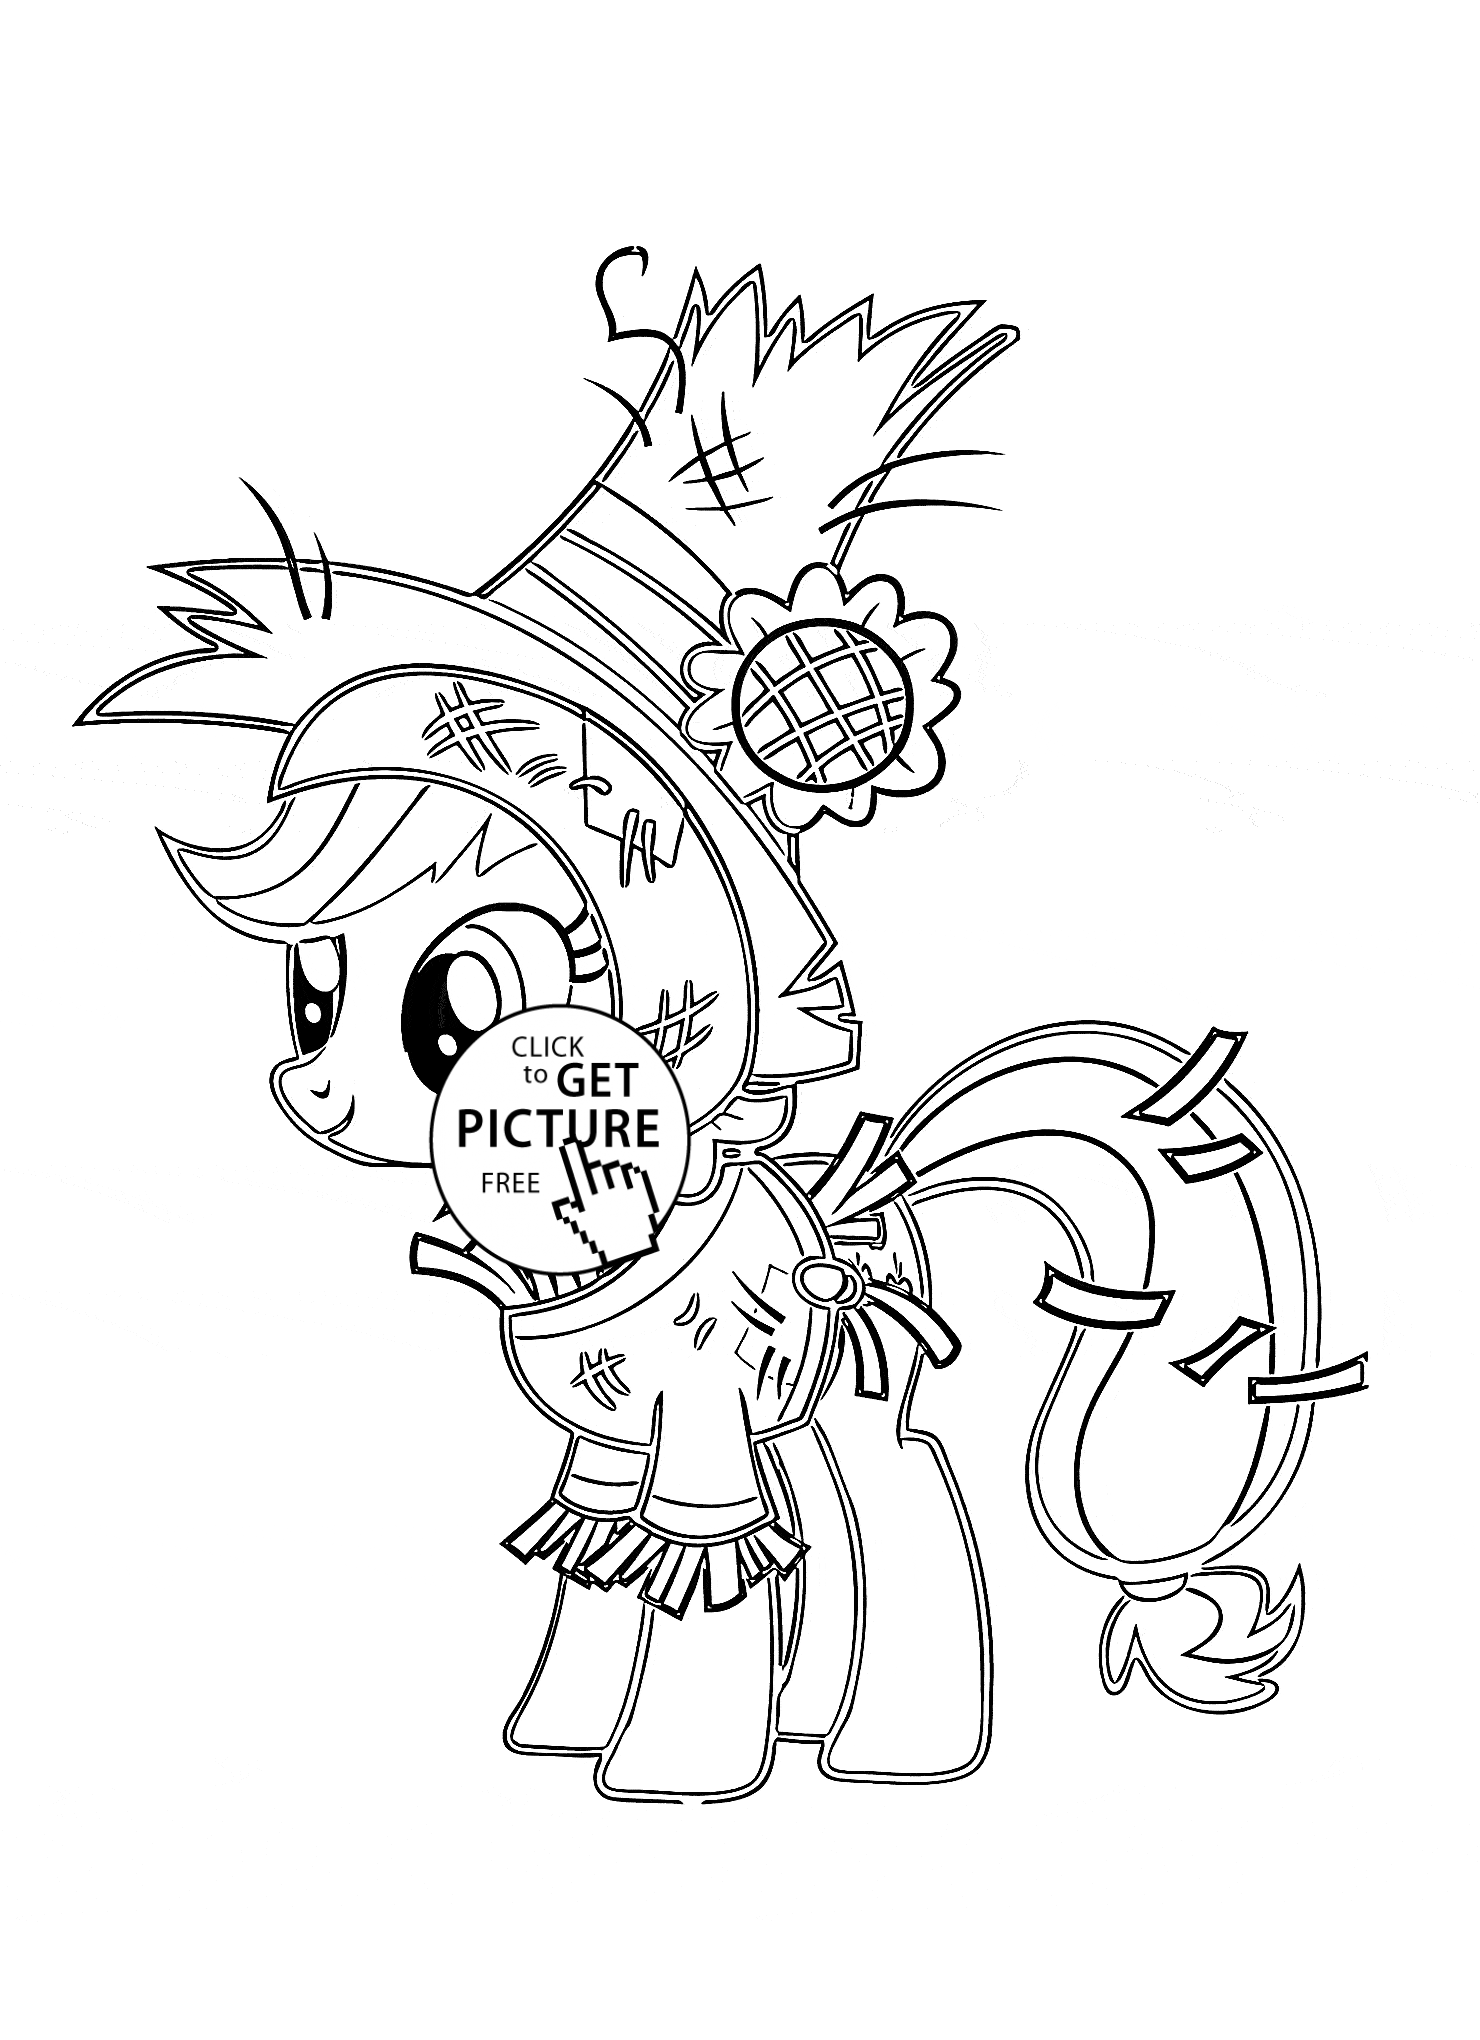 My little pony funny applejack pony halloween coloring page for kids for girls coloring pâ halloween coloring pages witch coloring pages cartoon coloring pages